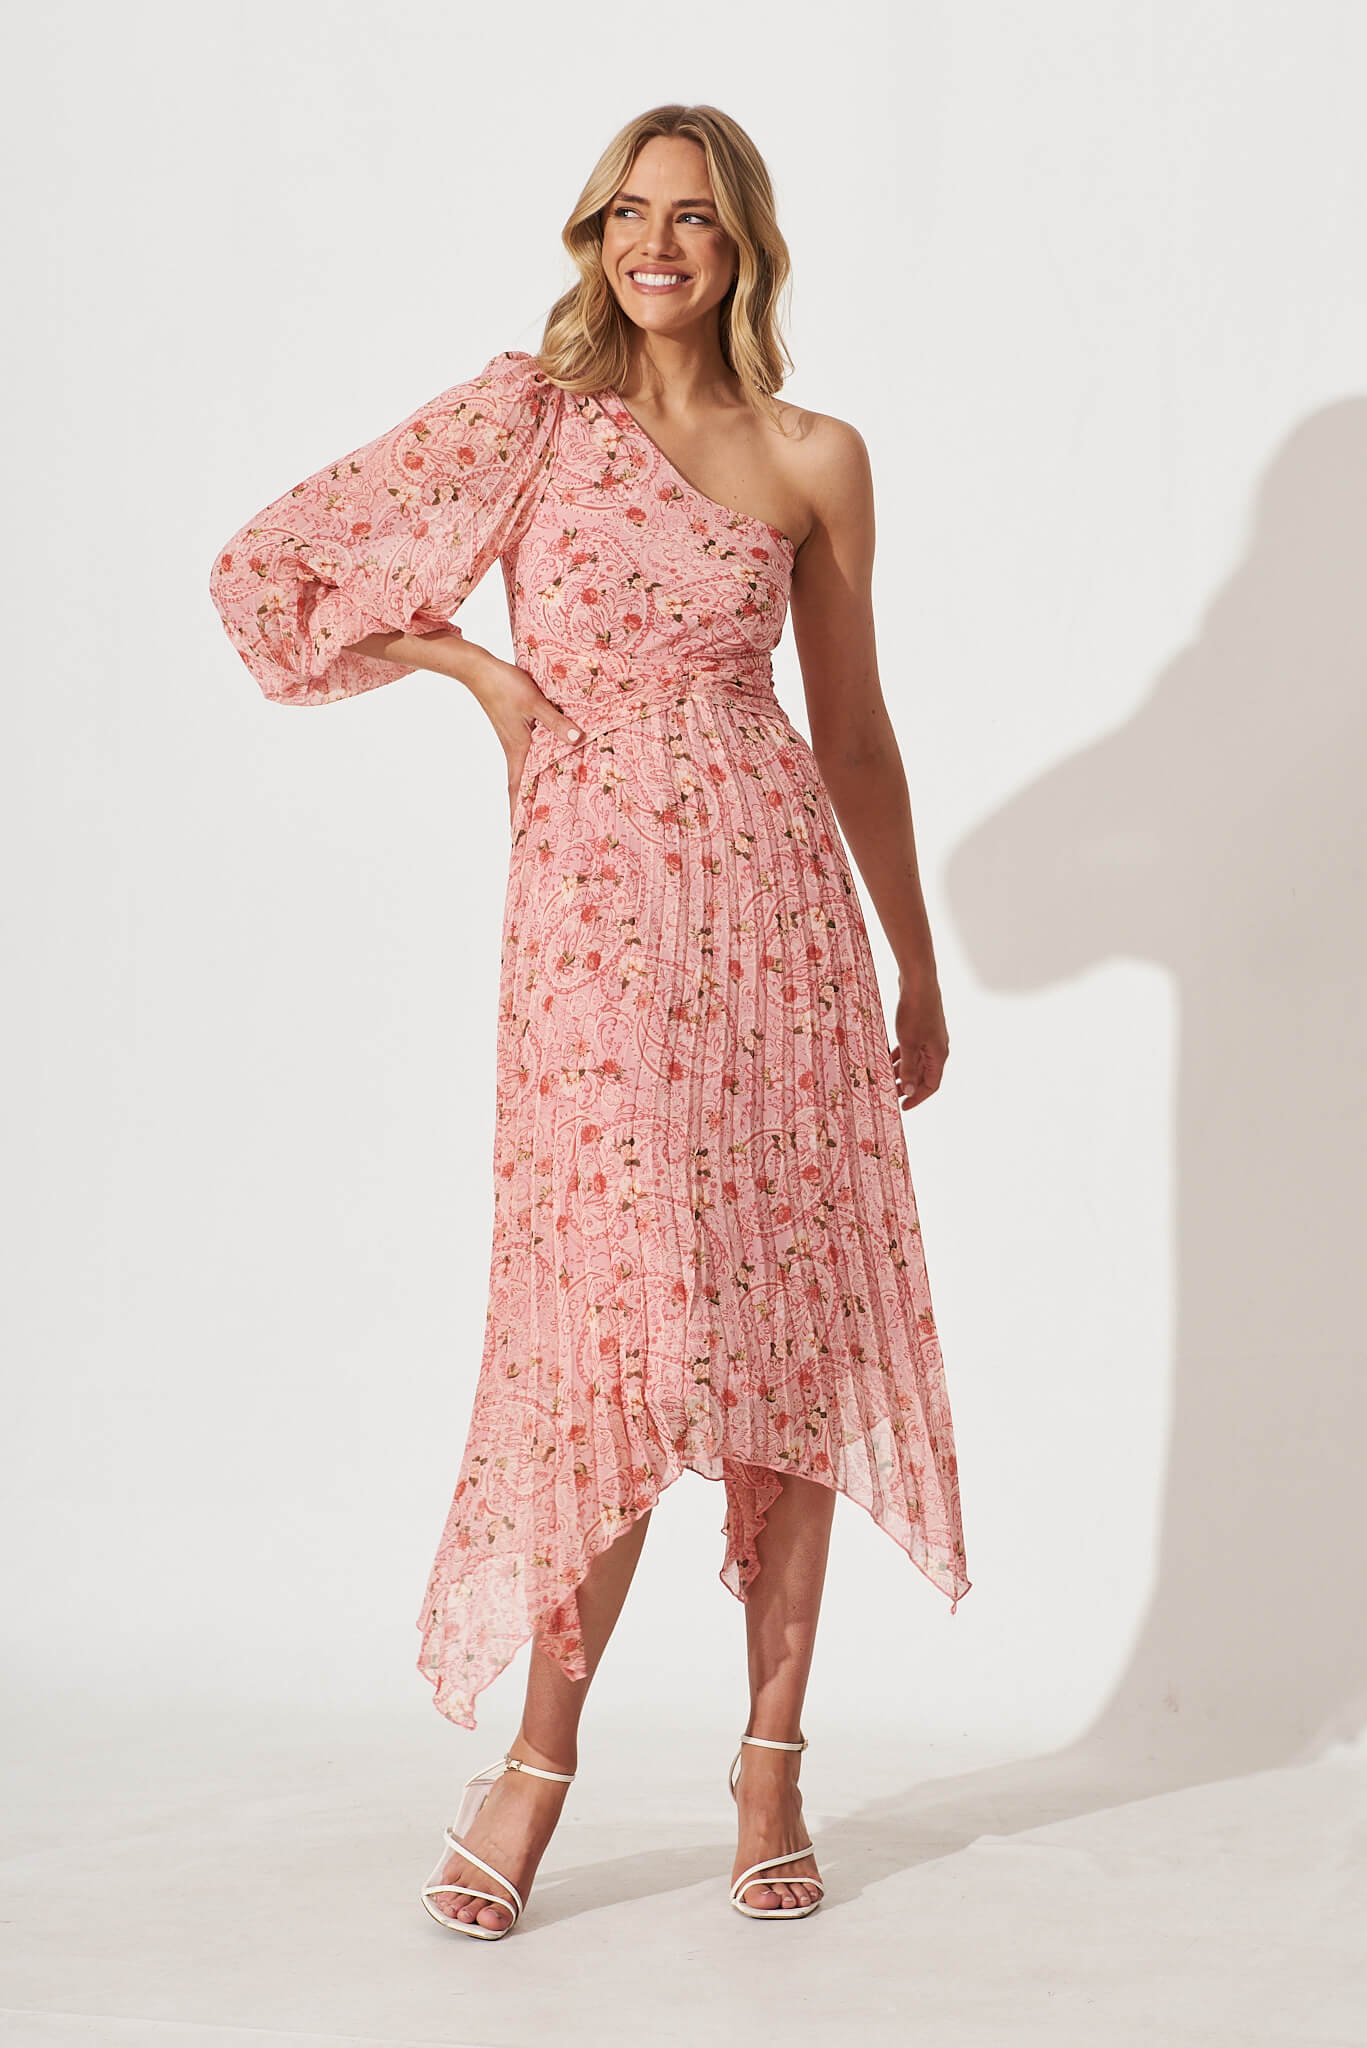 Cabana One Shoulder Midi Dress In Pink Floral Chiffon - full length